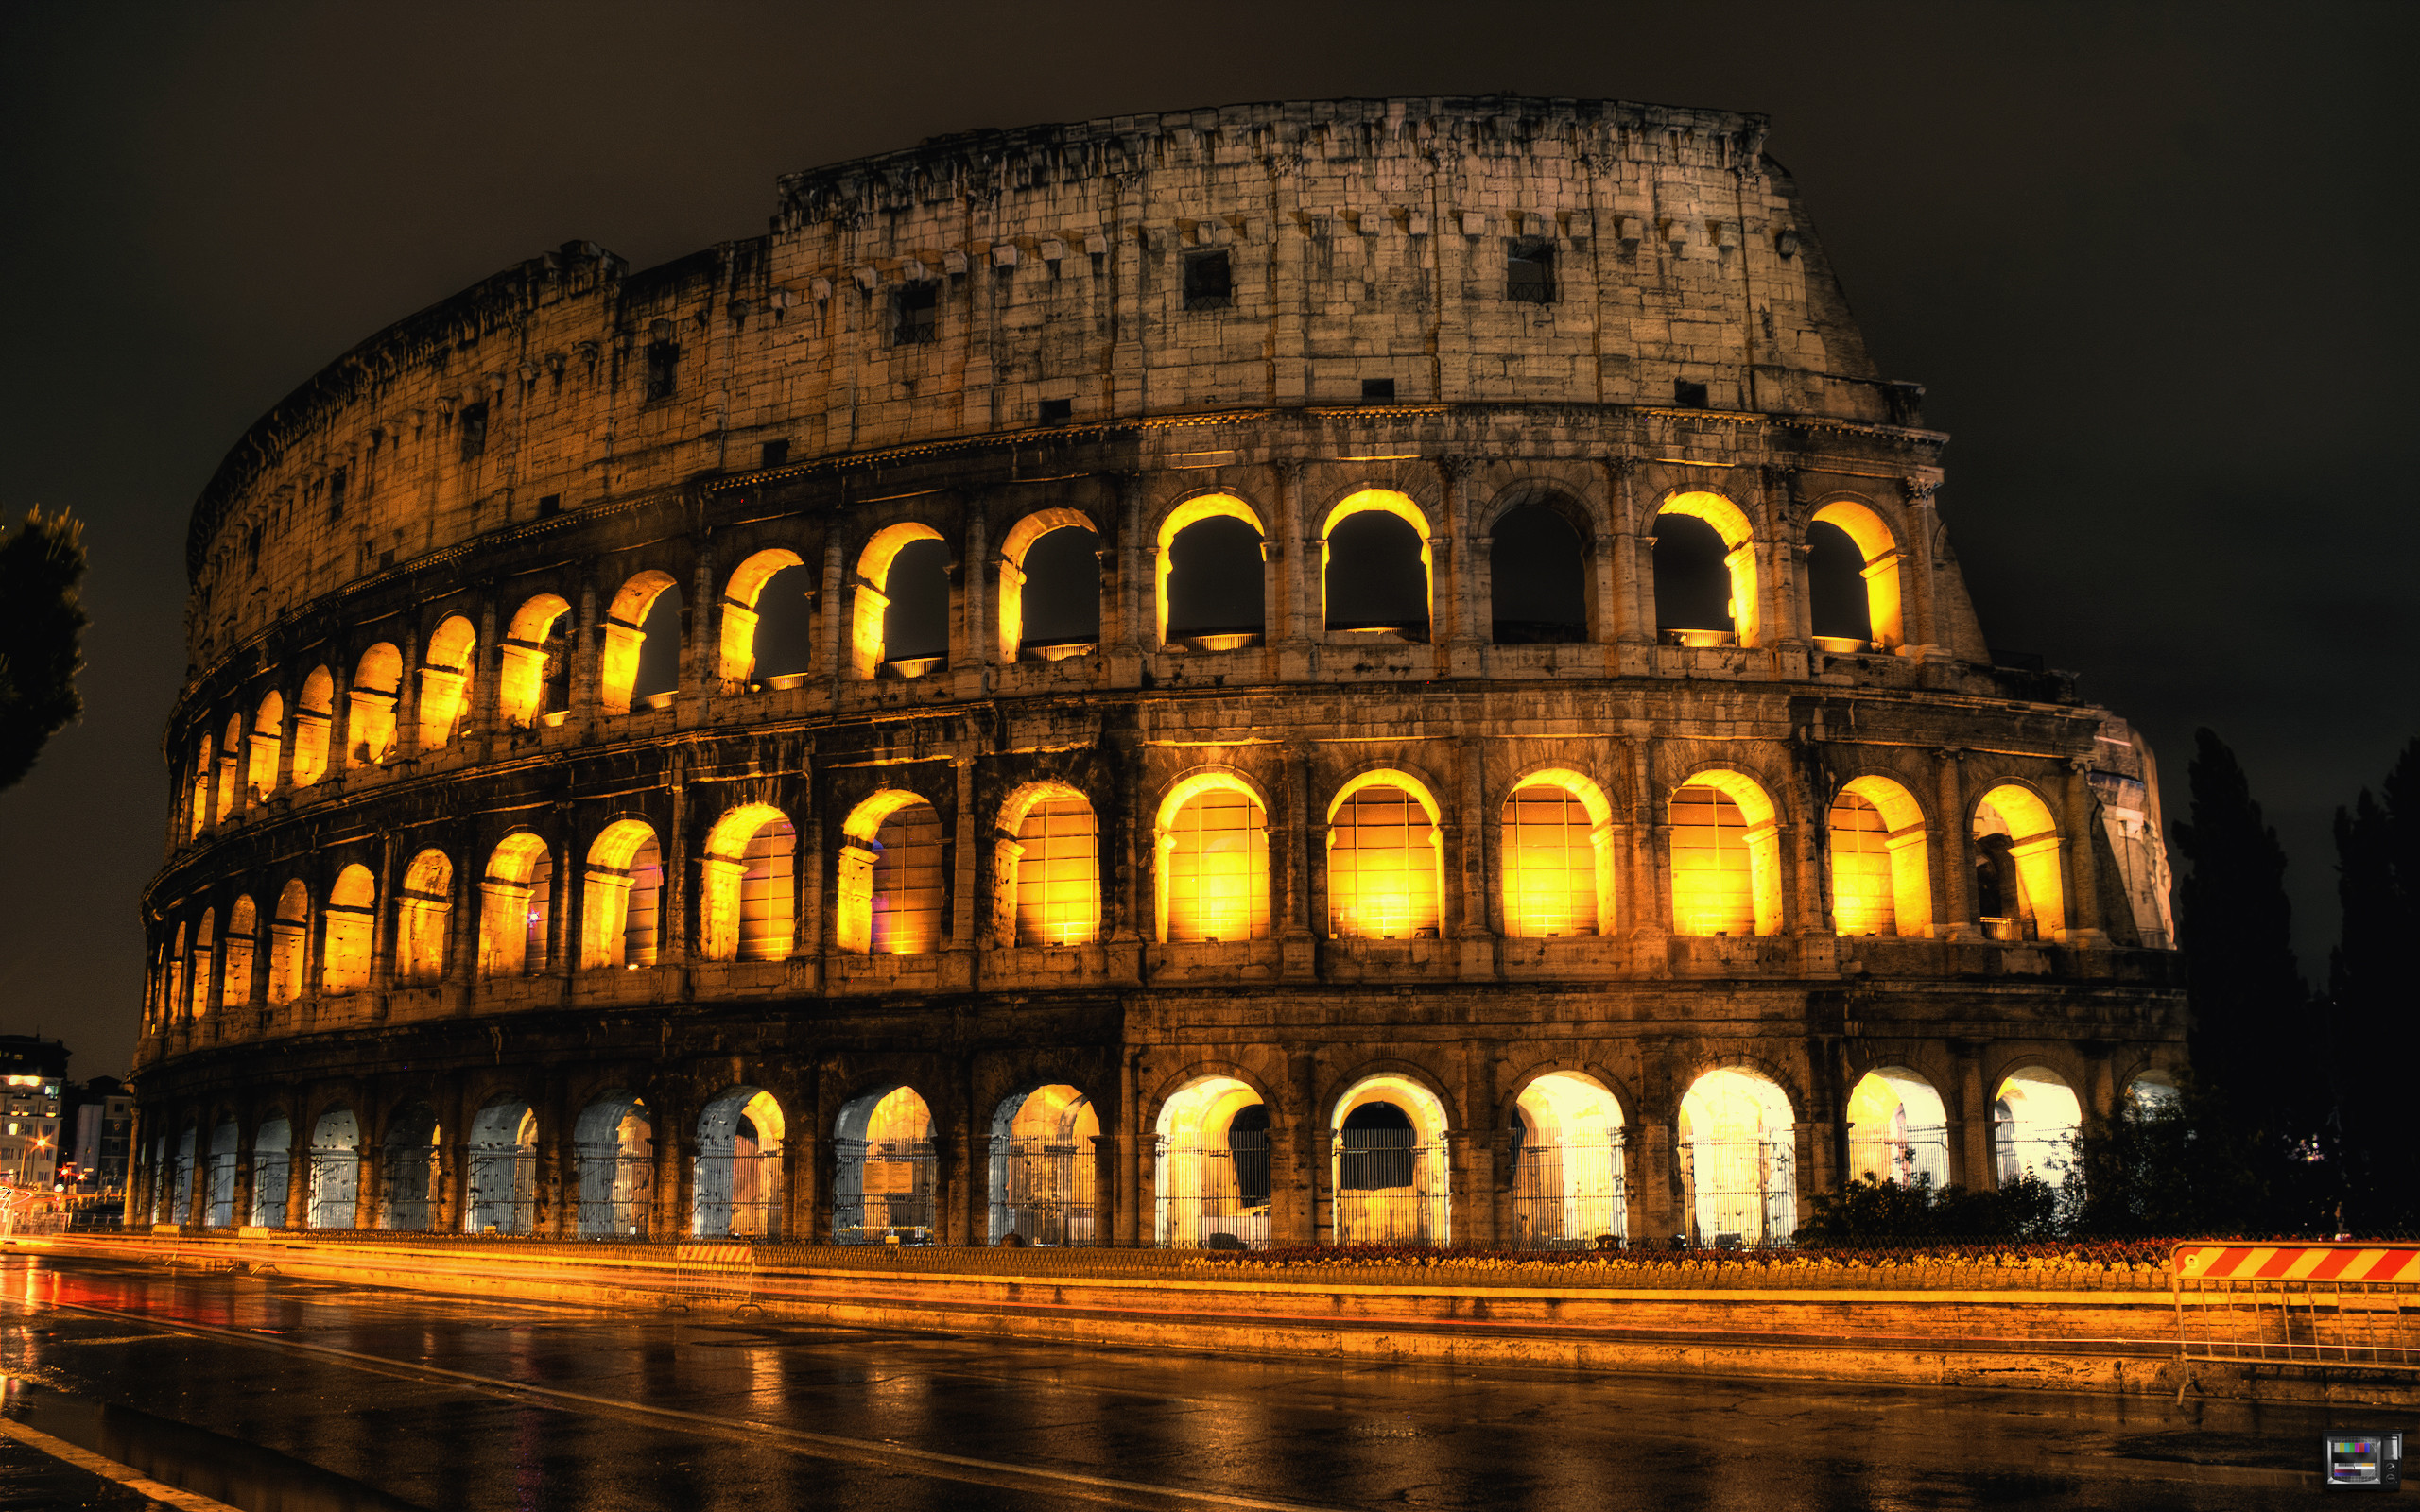 2560x1600 The Colosseum in Rome wallpapers and images - wallpapers, pictures, photos